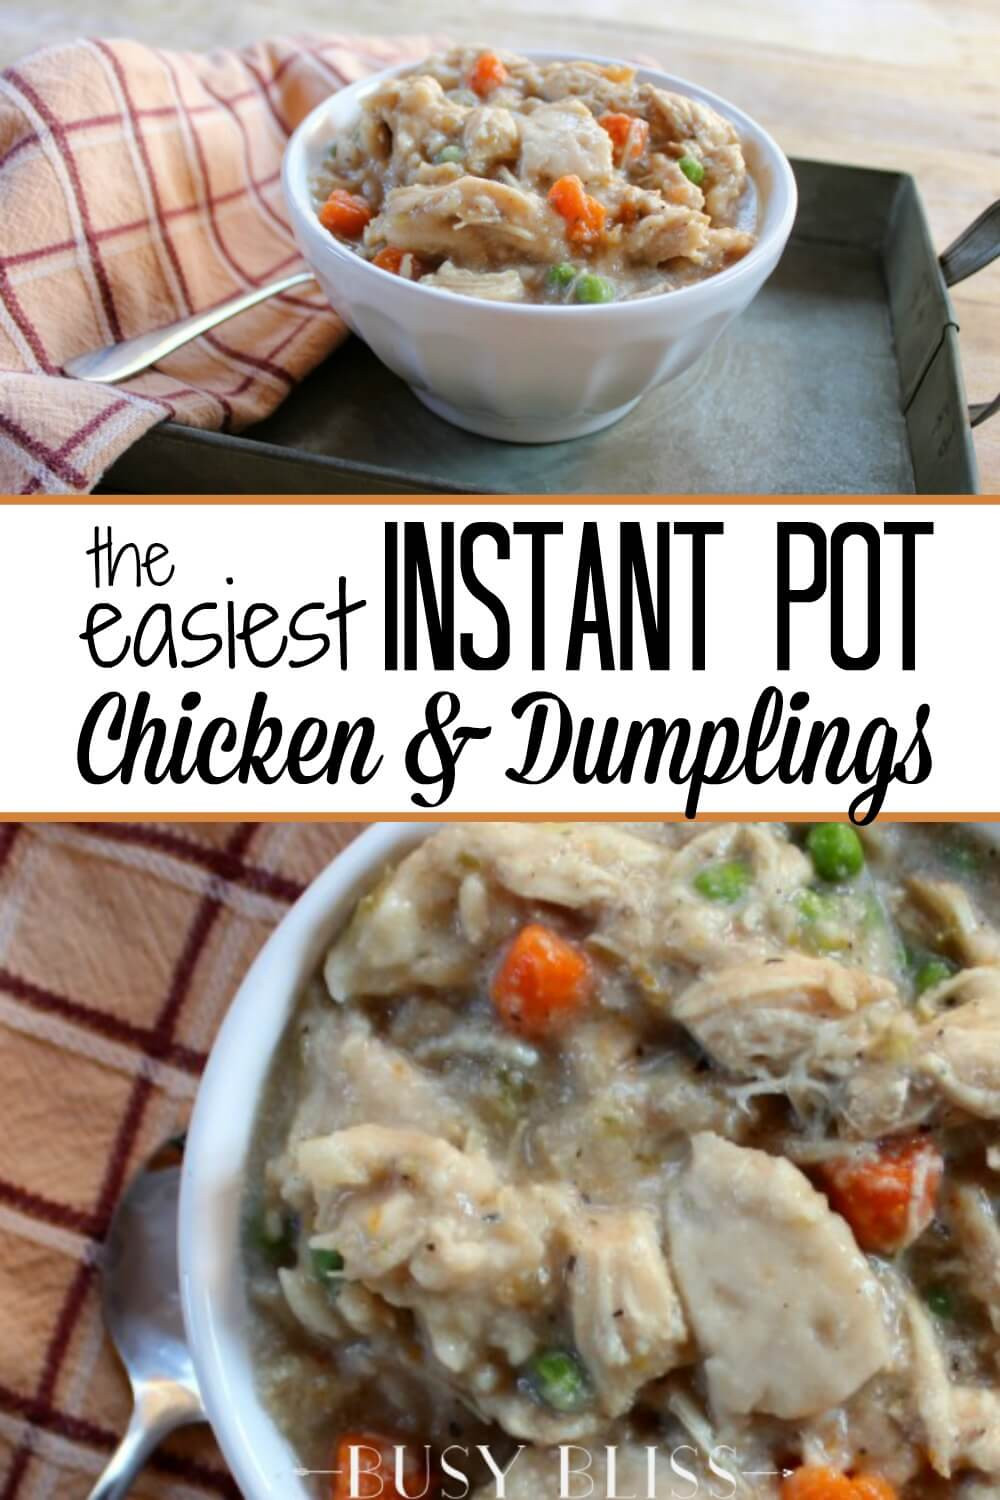 Pressure Cooker Chicken And Dumplings Canned Biscuits
 The Easiest Instant Pot Chicken and Dumplings Busy Bliss